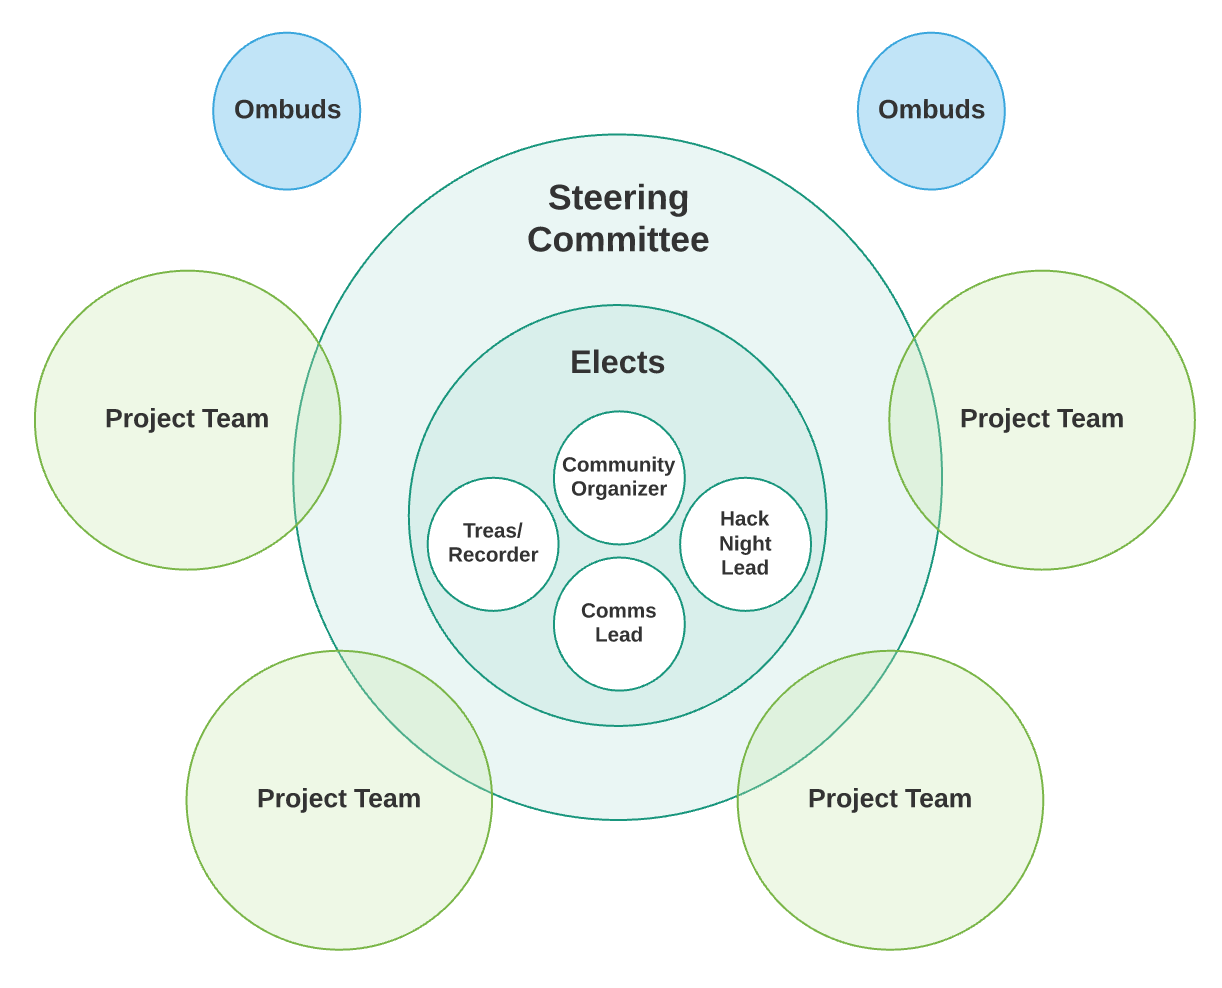 Bubble chart depicting the Steering Committee in a large circle containing the four elected leads; several project team circles overlap the steering committee circle and two Ombuds circles sit outside of Steering Committee.